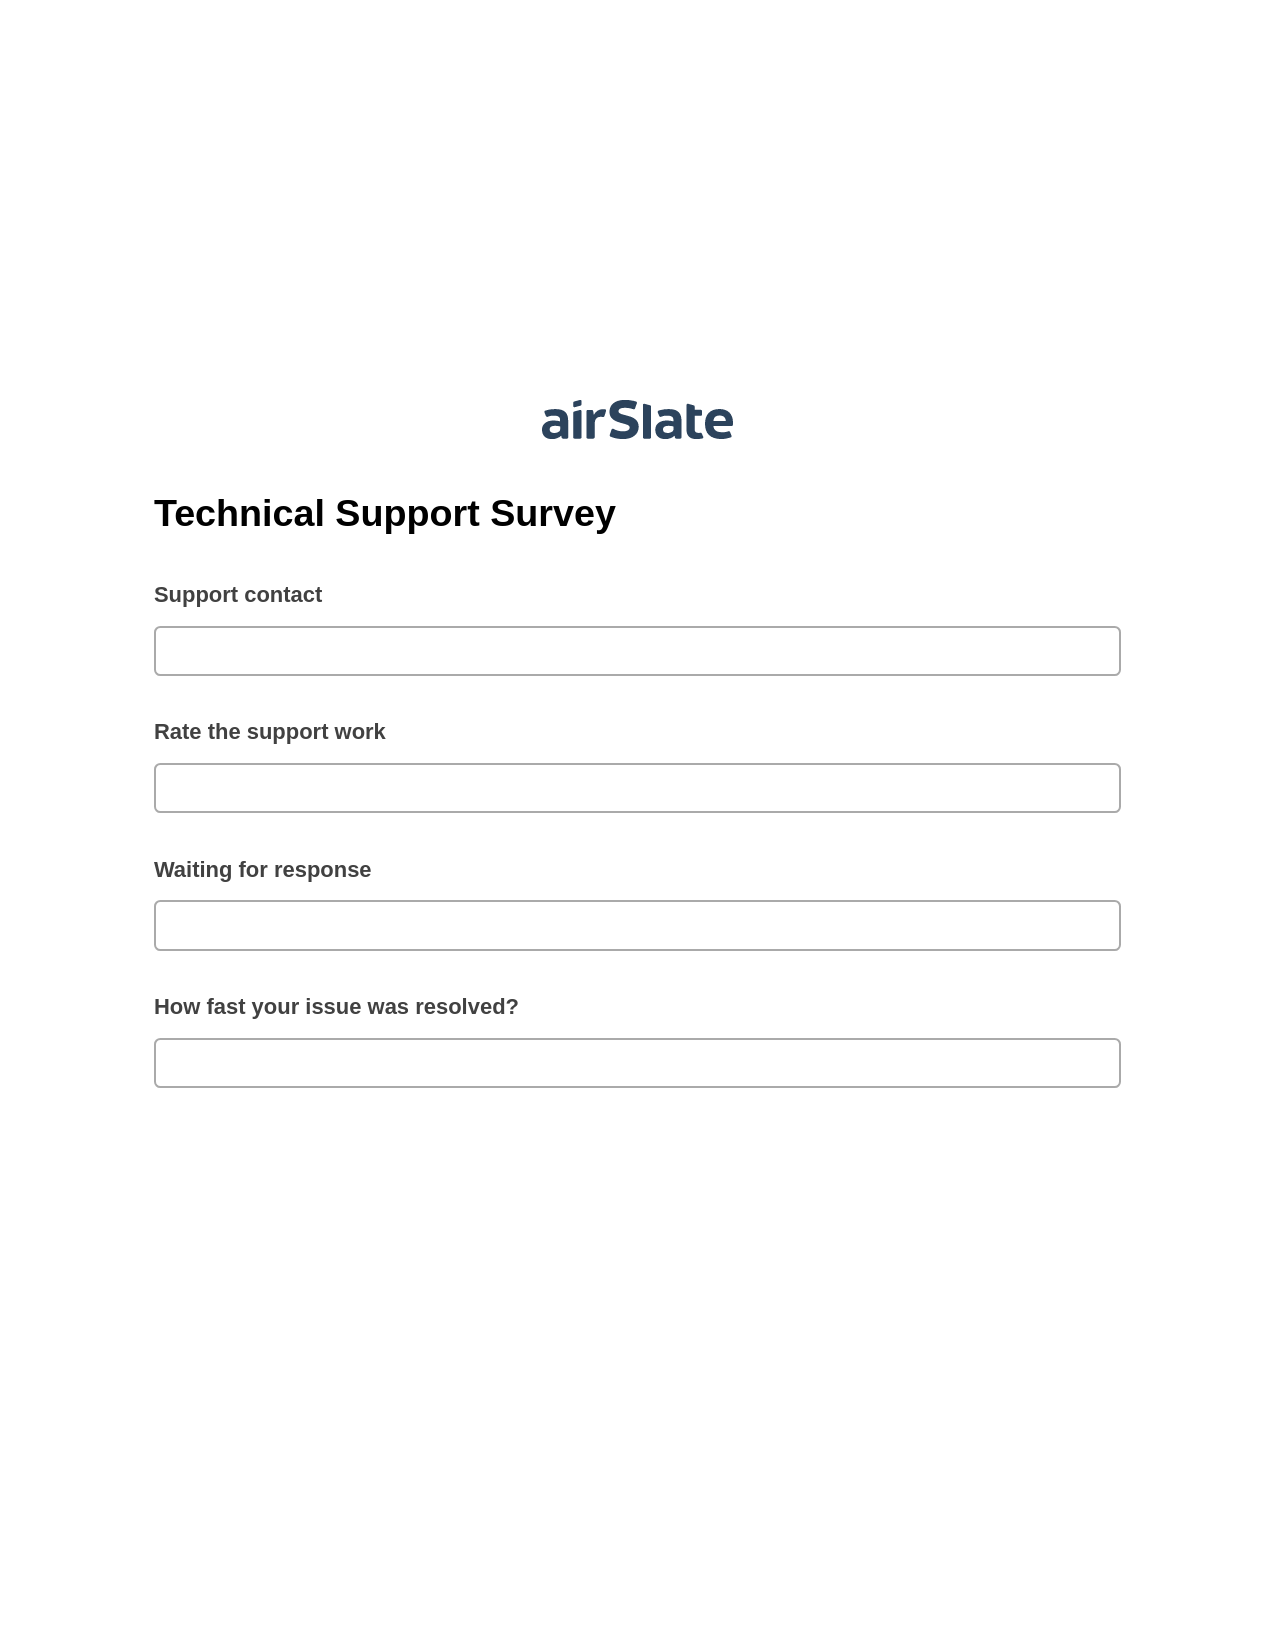 Technical Support Survey Pre-fill from Salesforce Records with SOQL Bot, Create slate from another Flow Bot, Post-finish Document Bot